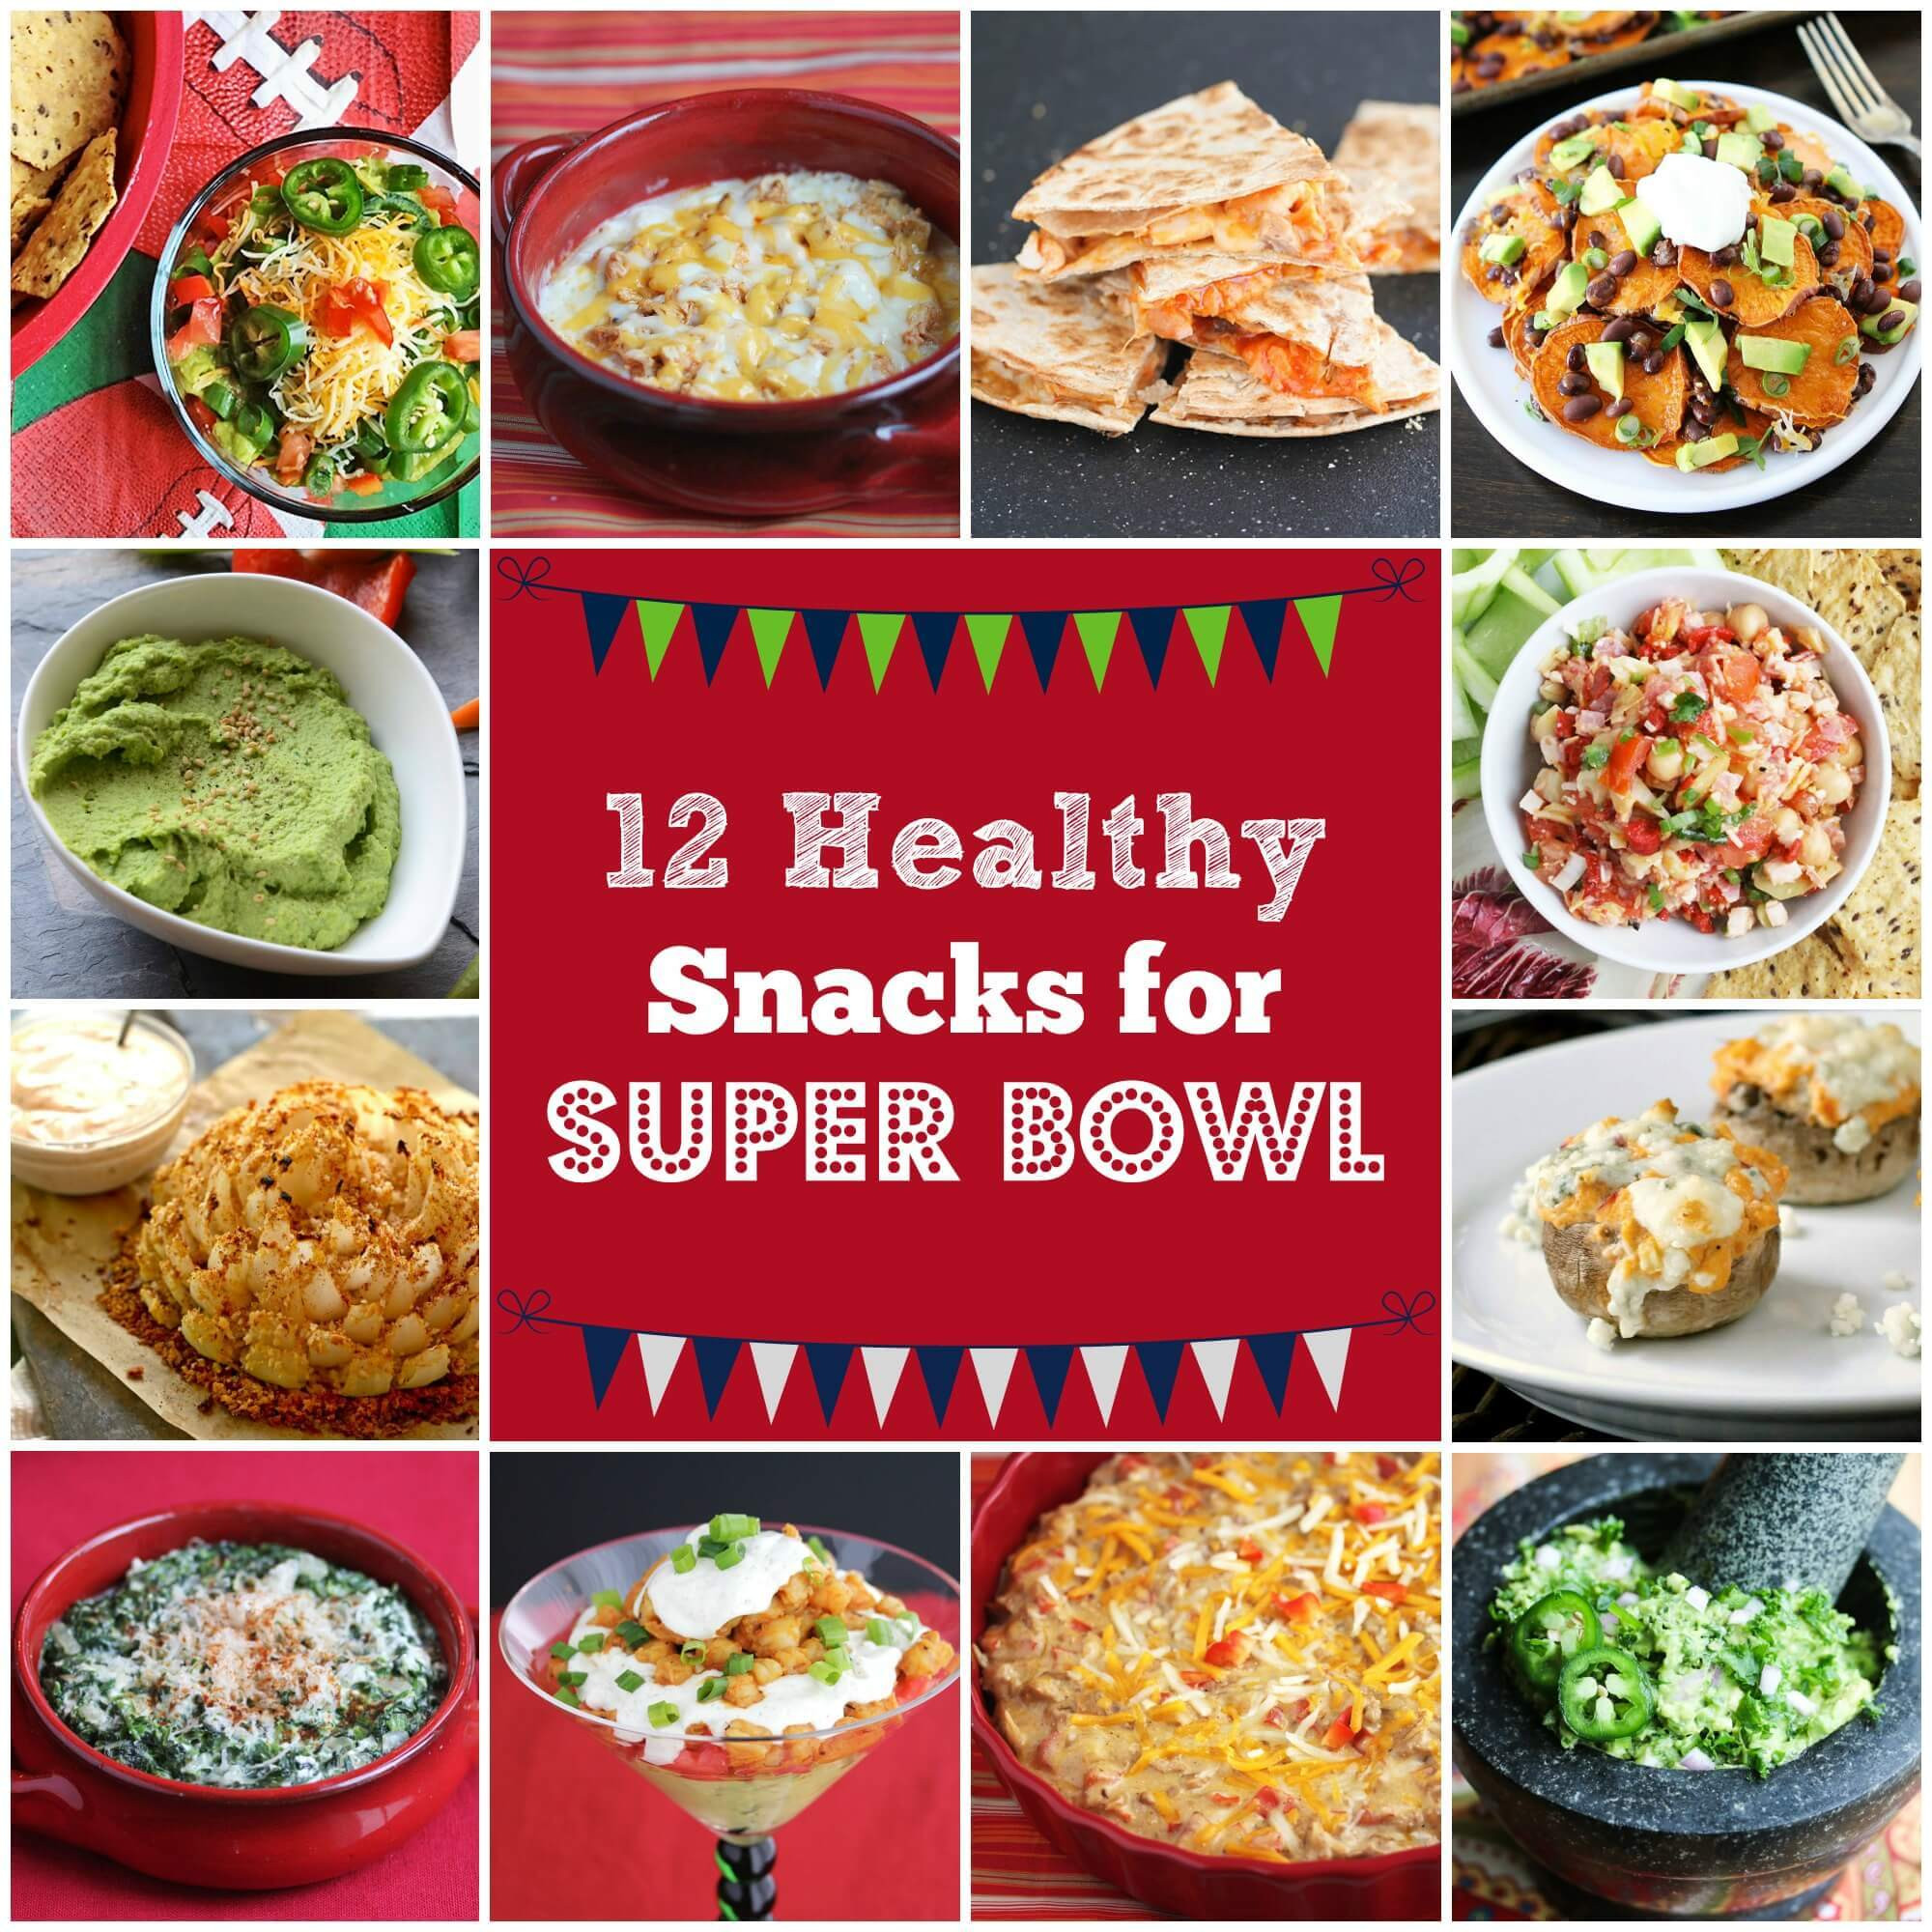 Super Bowl Recipes Pinterest
 12 Healthy Super Bowl Snack Recipes Jeanette s Healthy